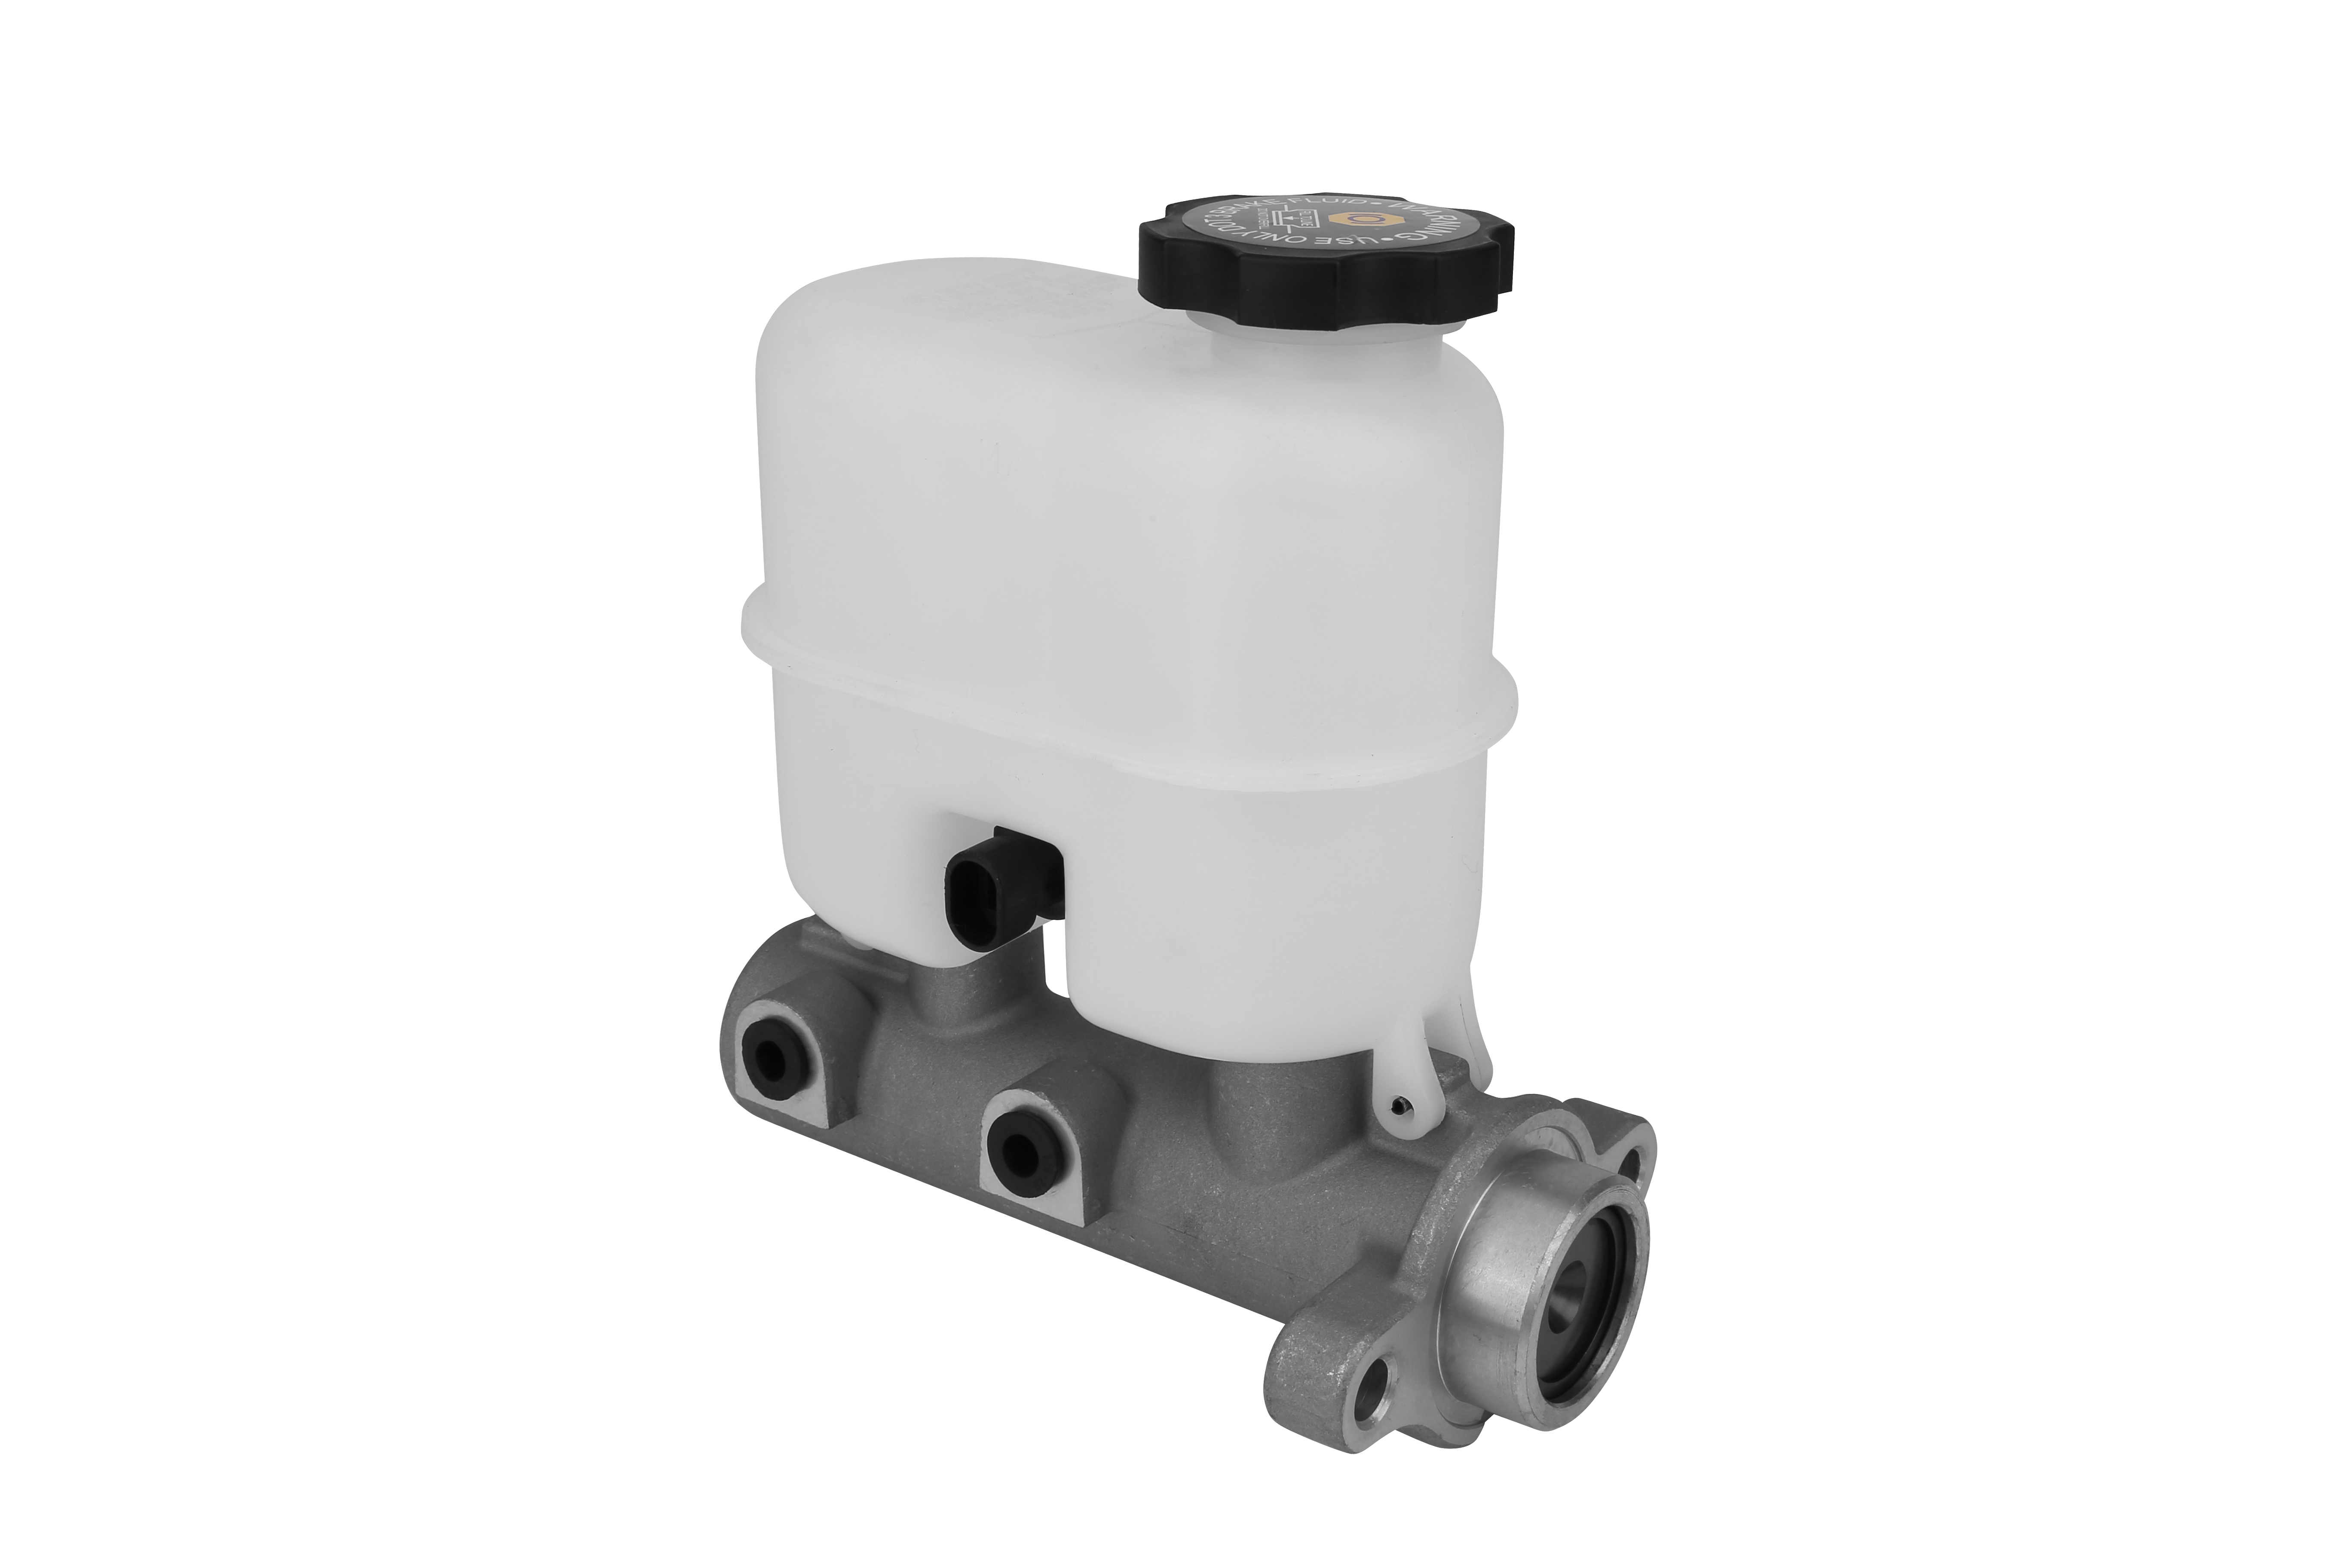 Brake Master Cylinder - Replaces M630031 - Fits Cadillac, Chevrolet and GMC Vehicles Image